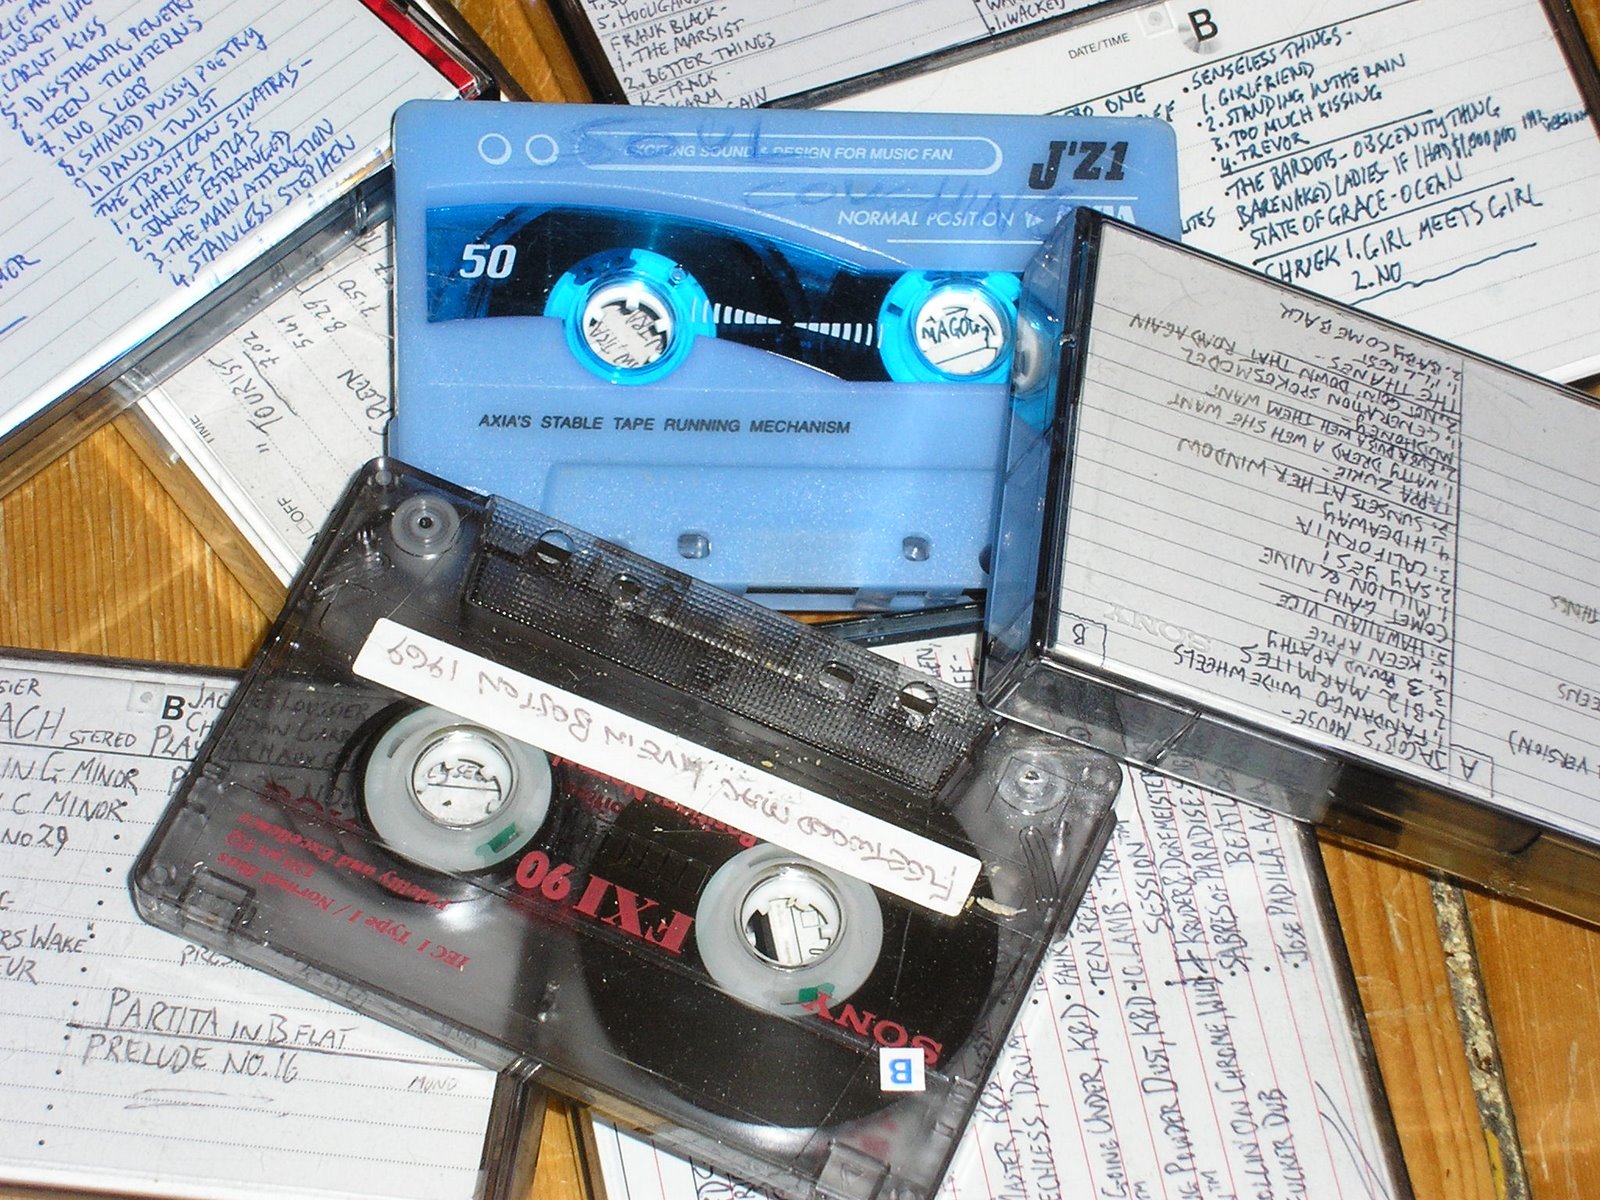 My Old Tapes